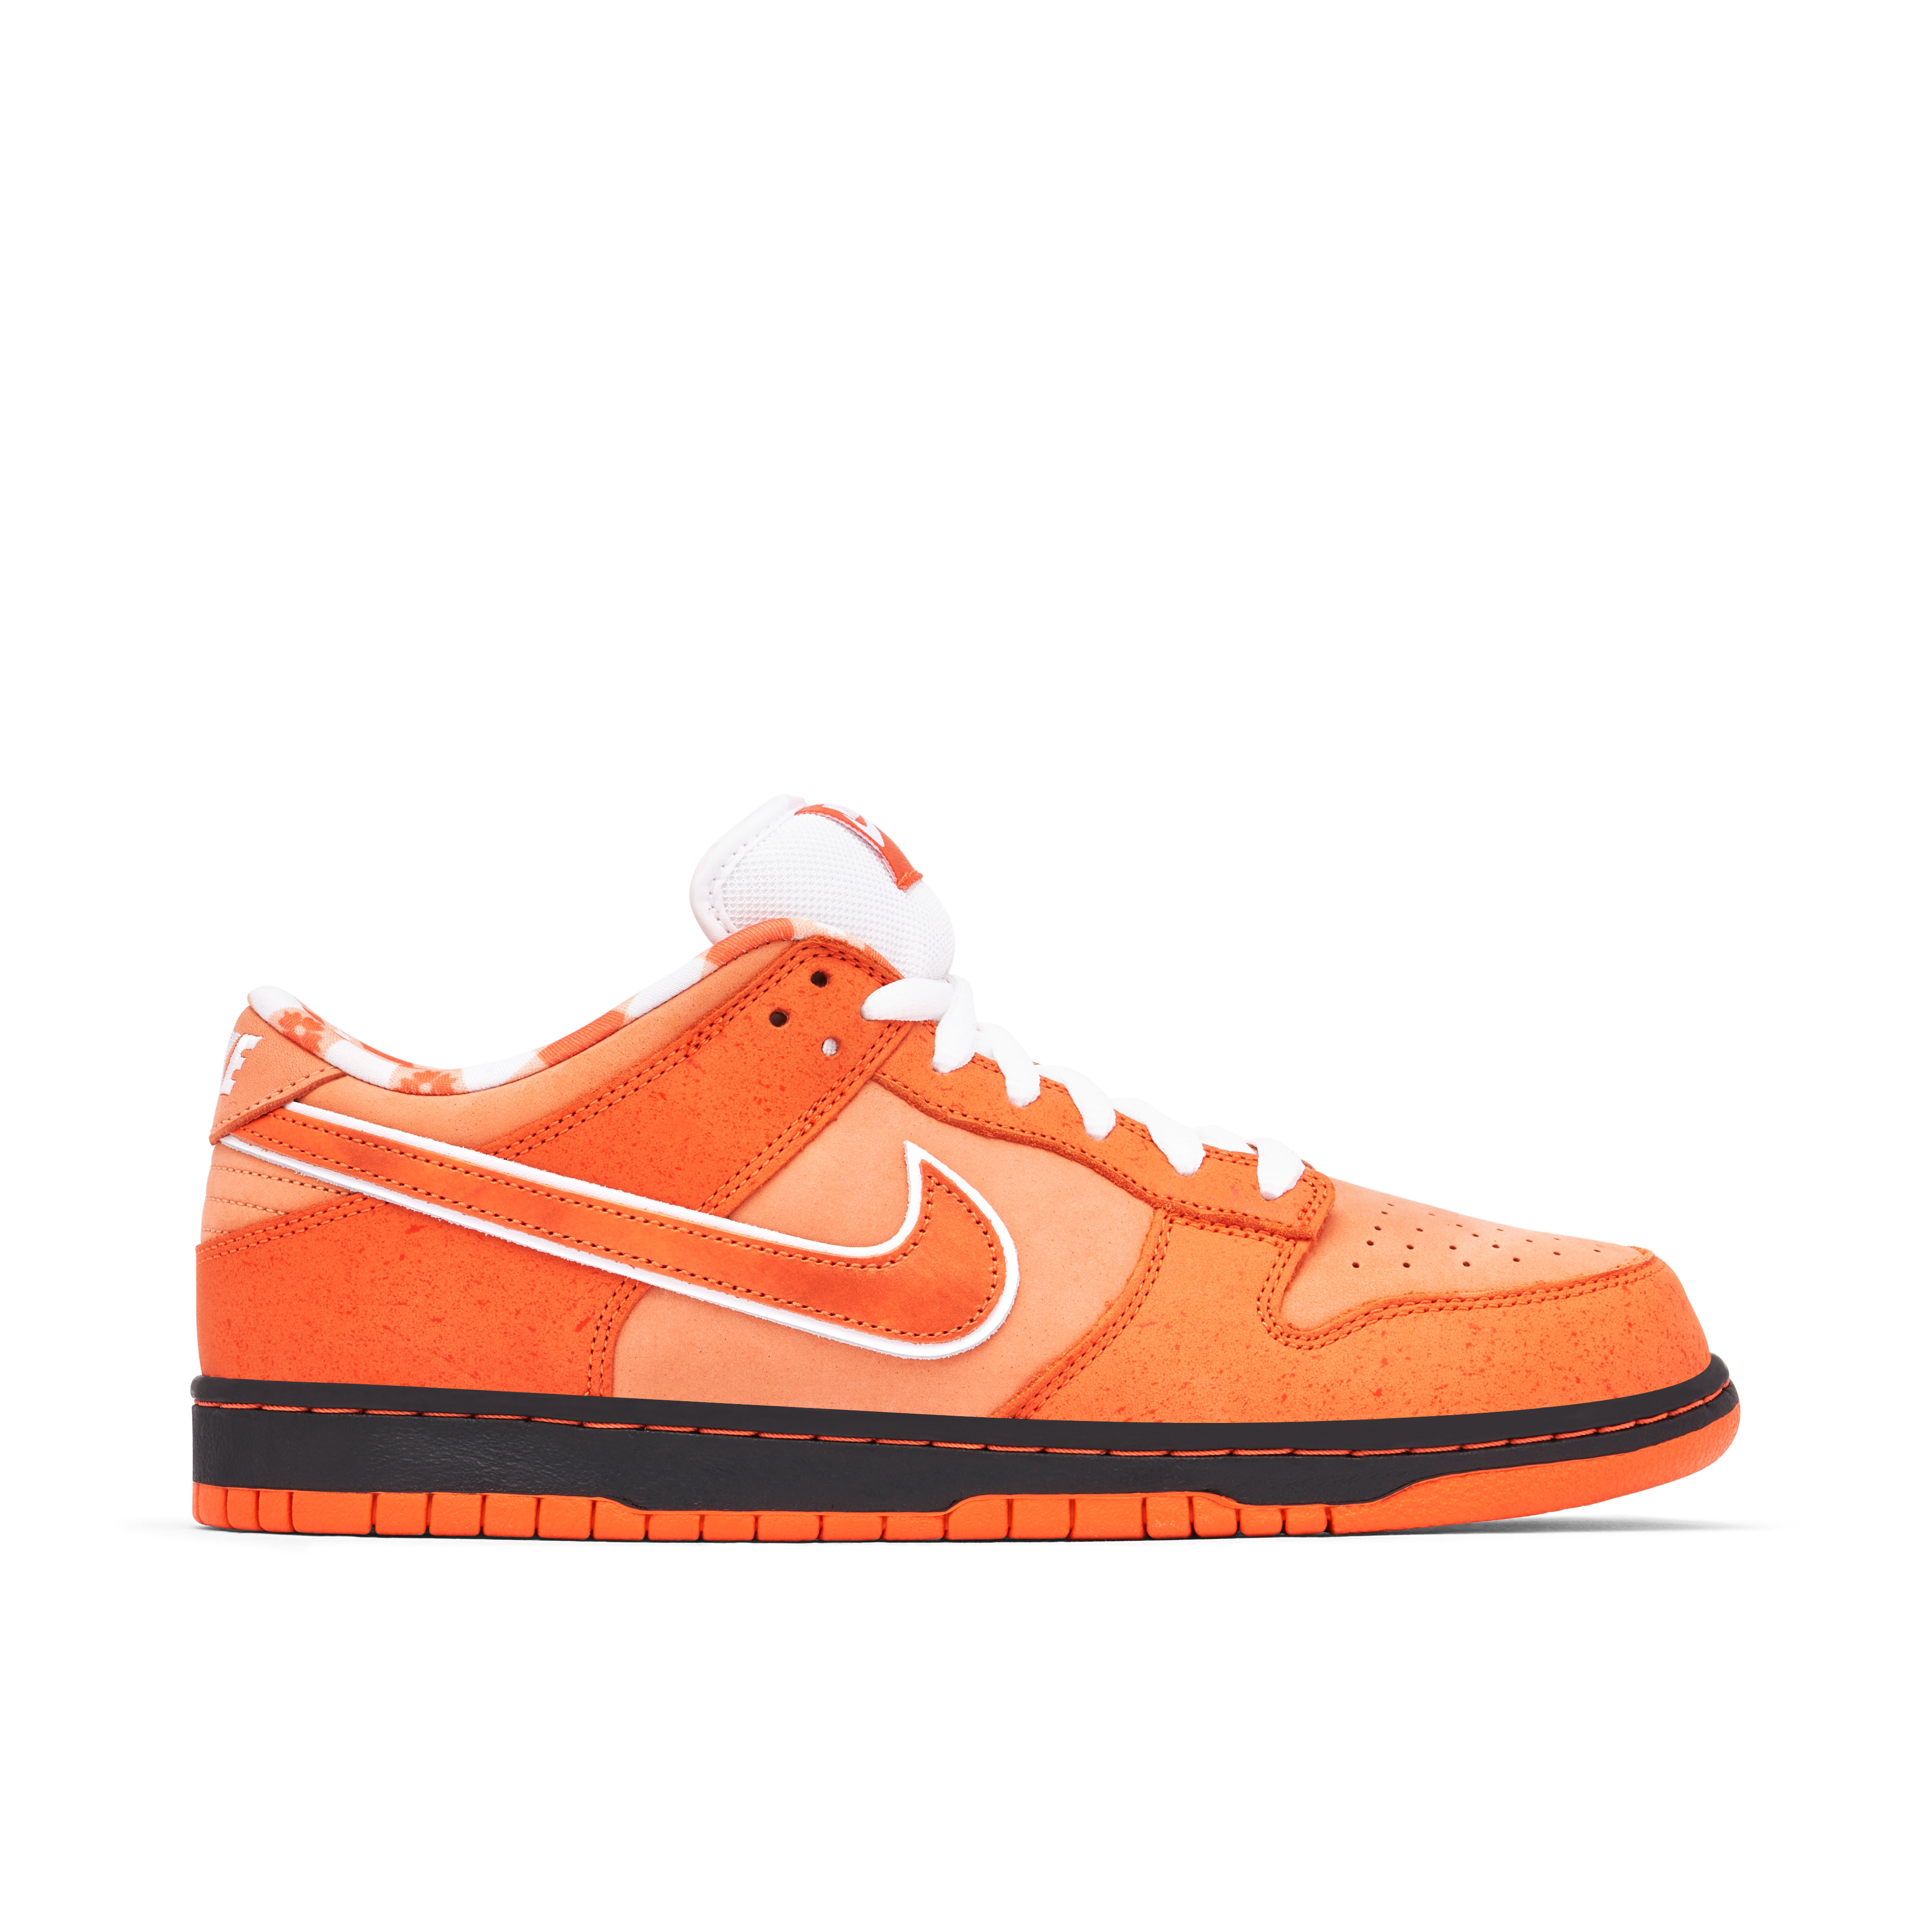 Nike SB Dunk Low x Concepts Orange Lobster | FD8776-800 | Laced